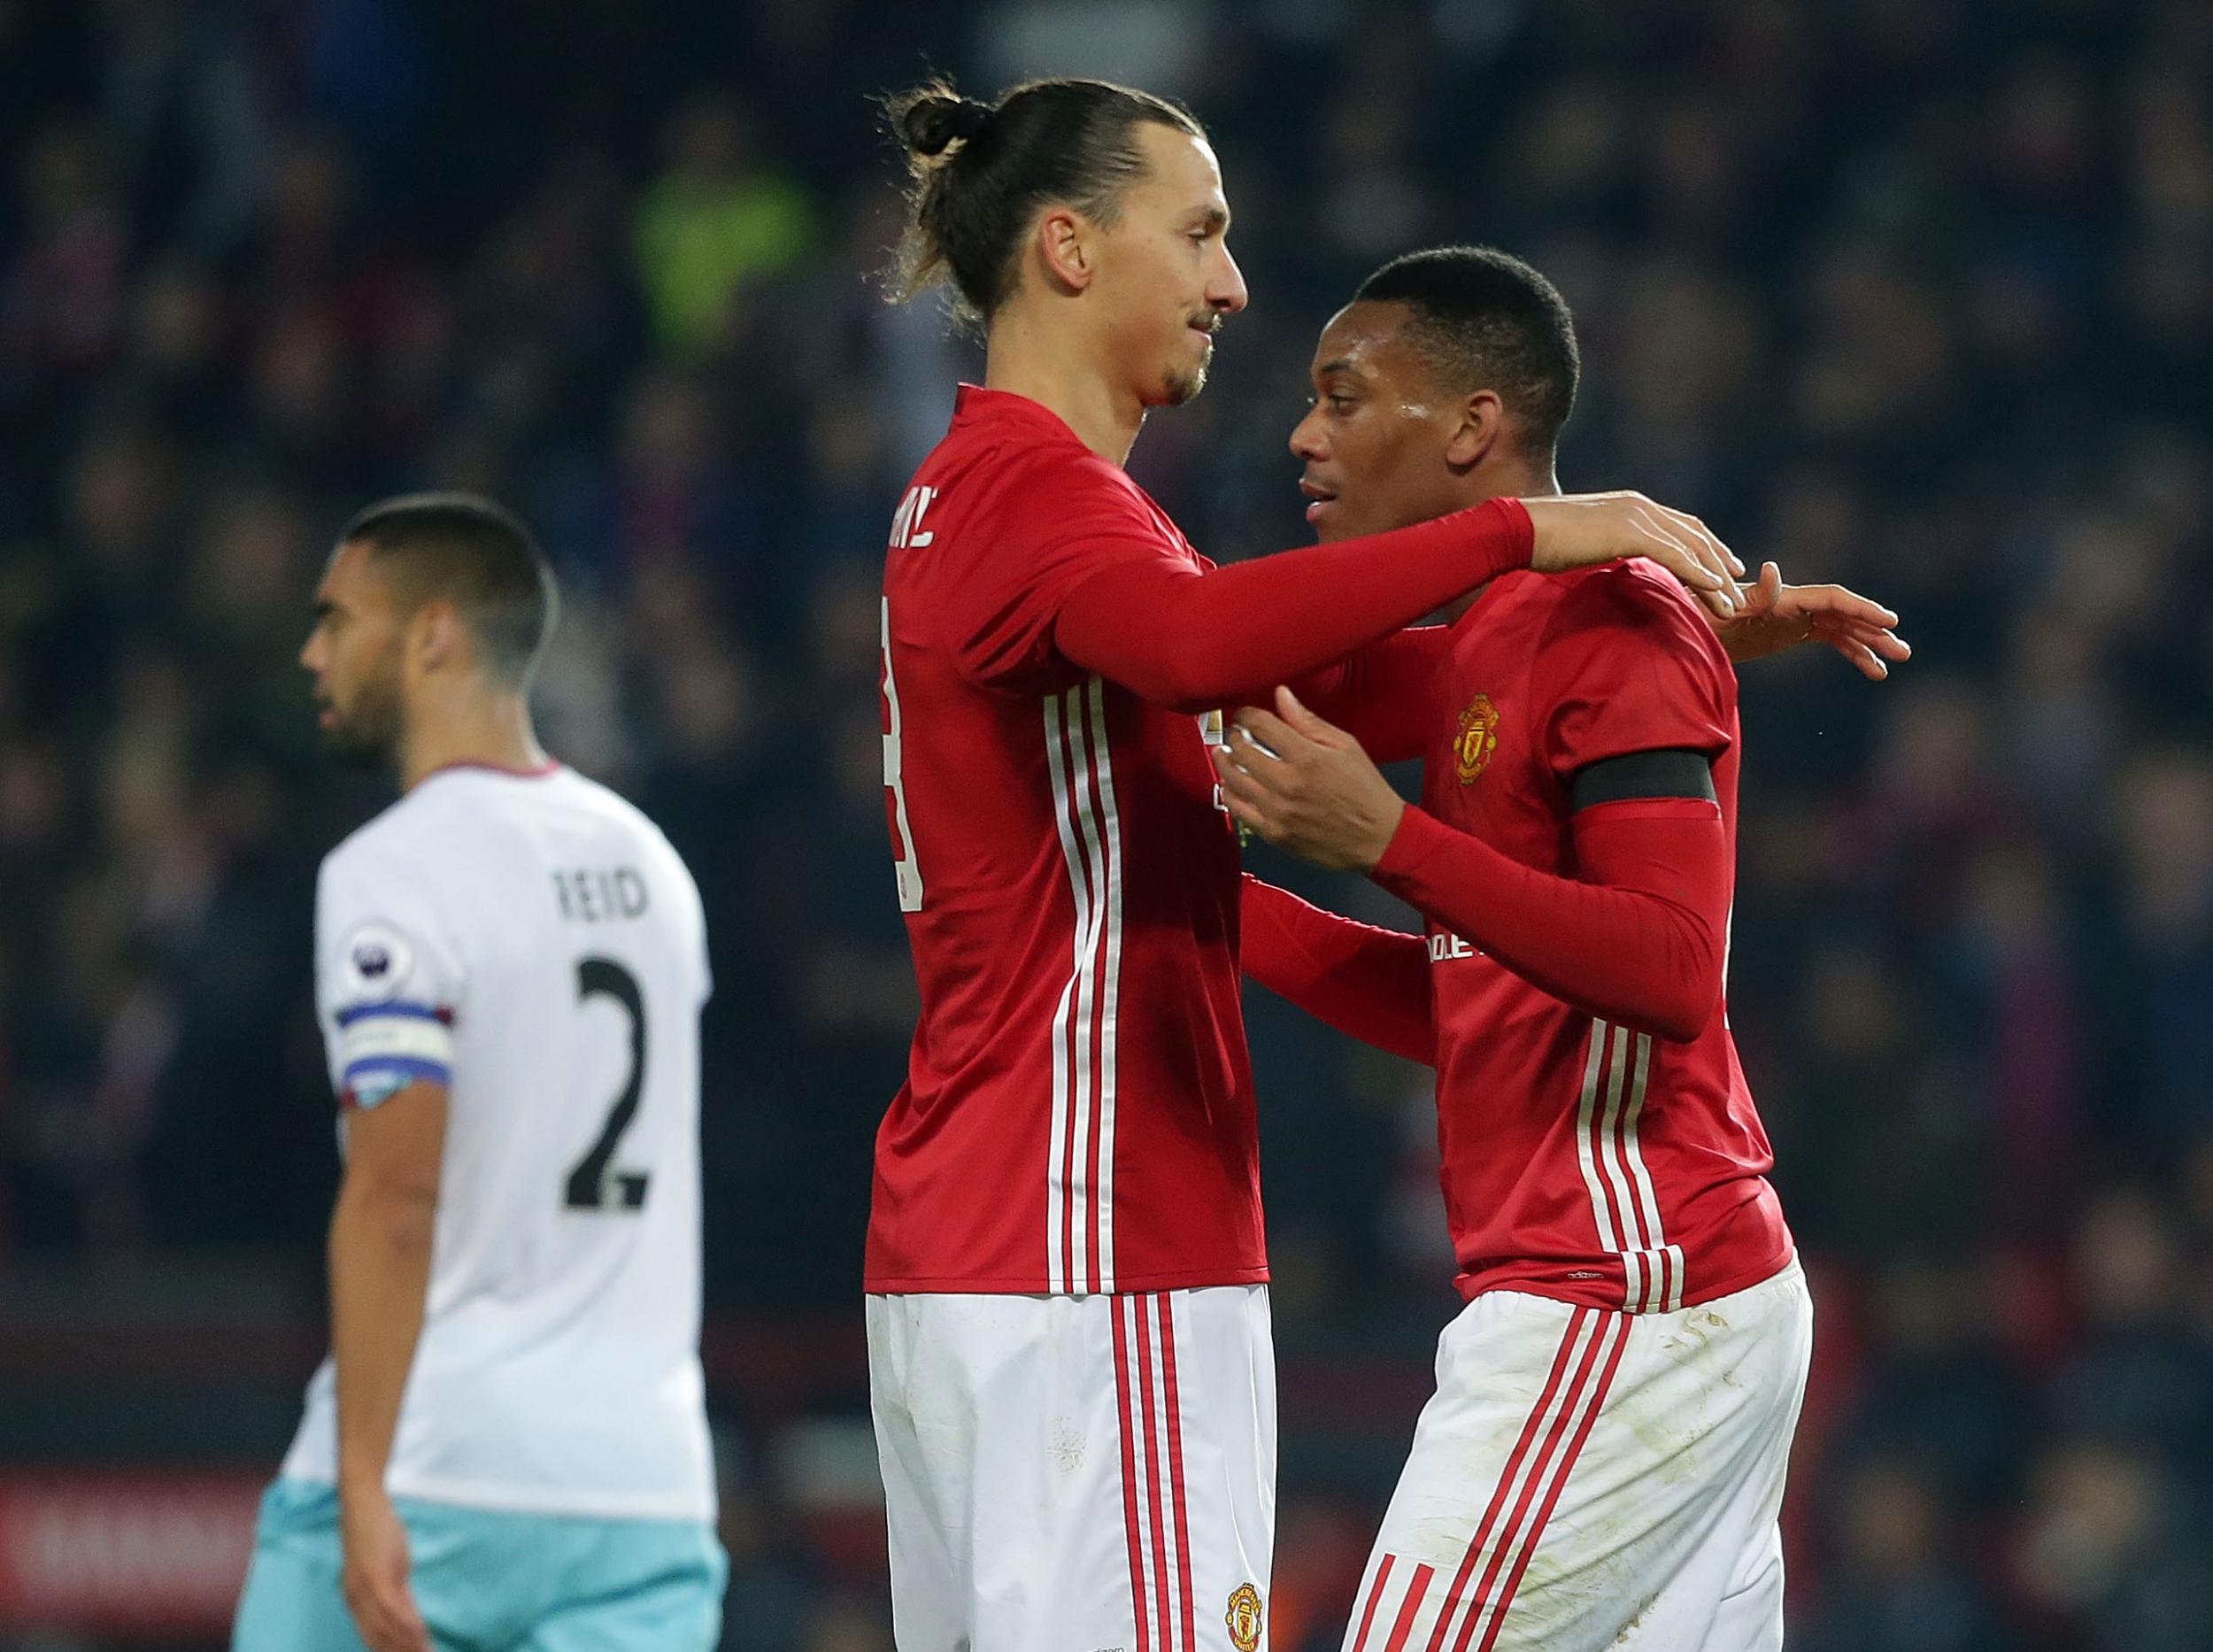 Ibrahimovic has praised Martial for his hard work and professionalism